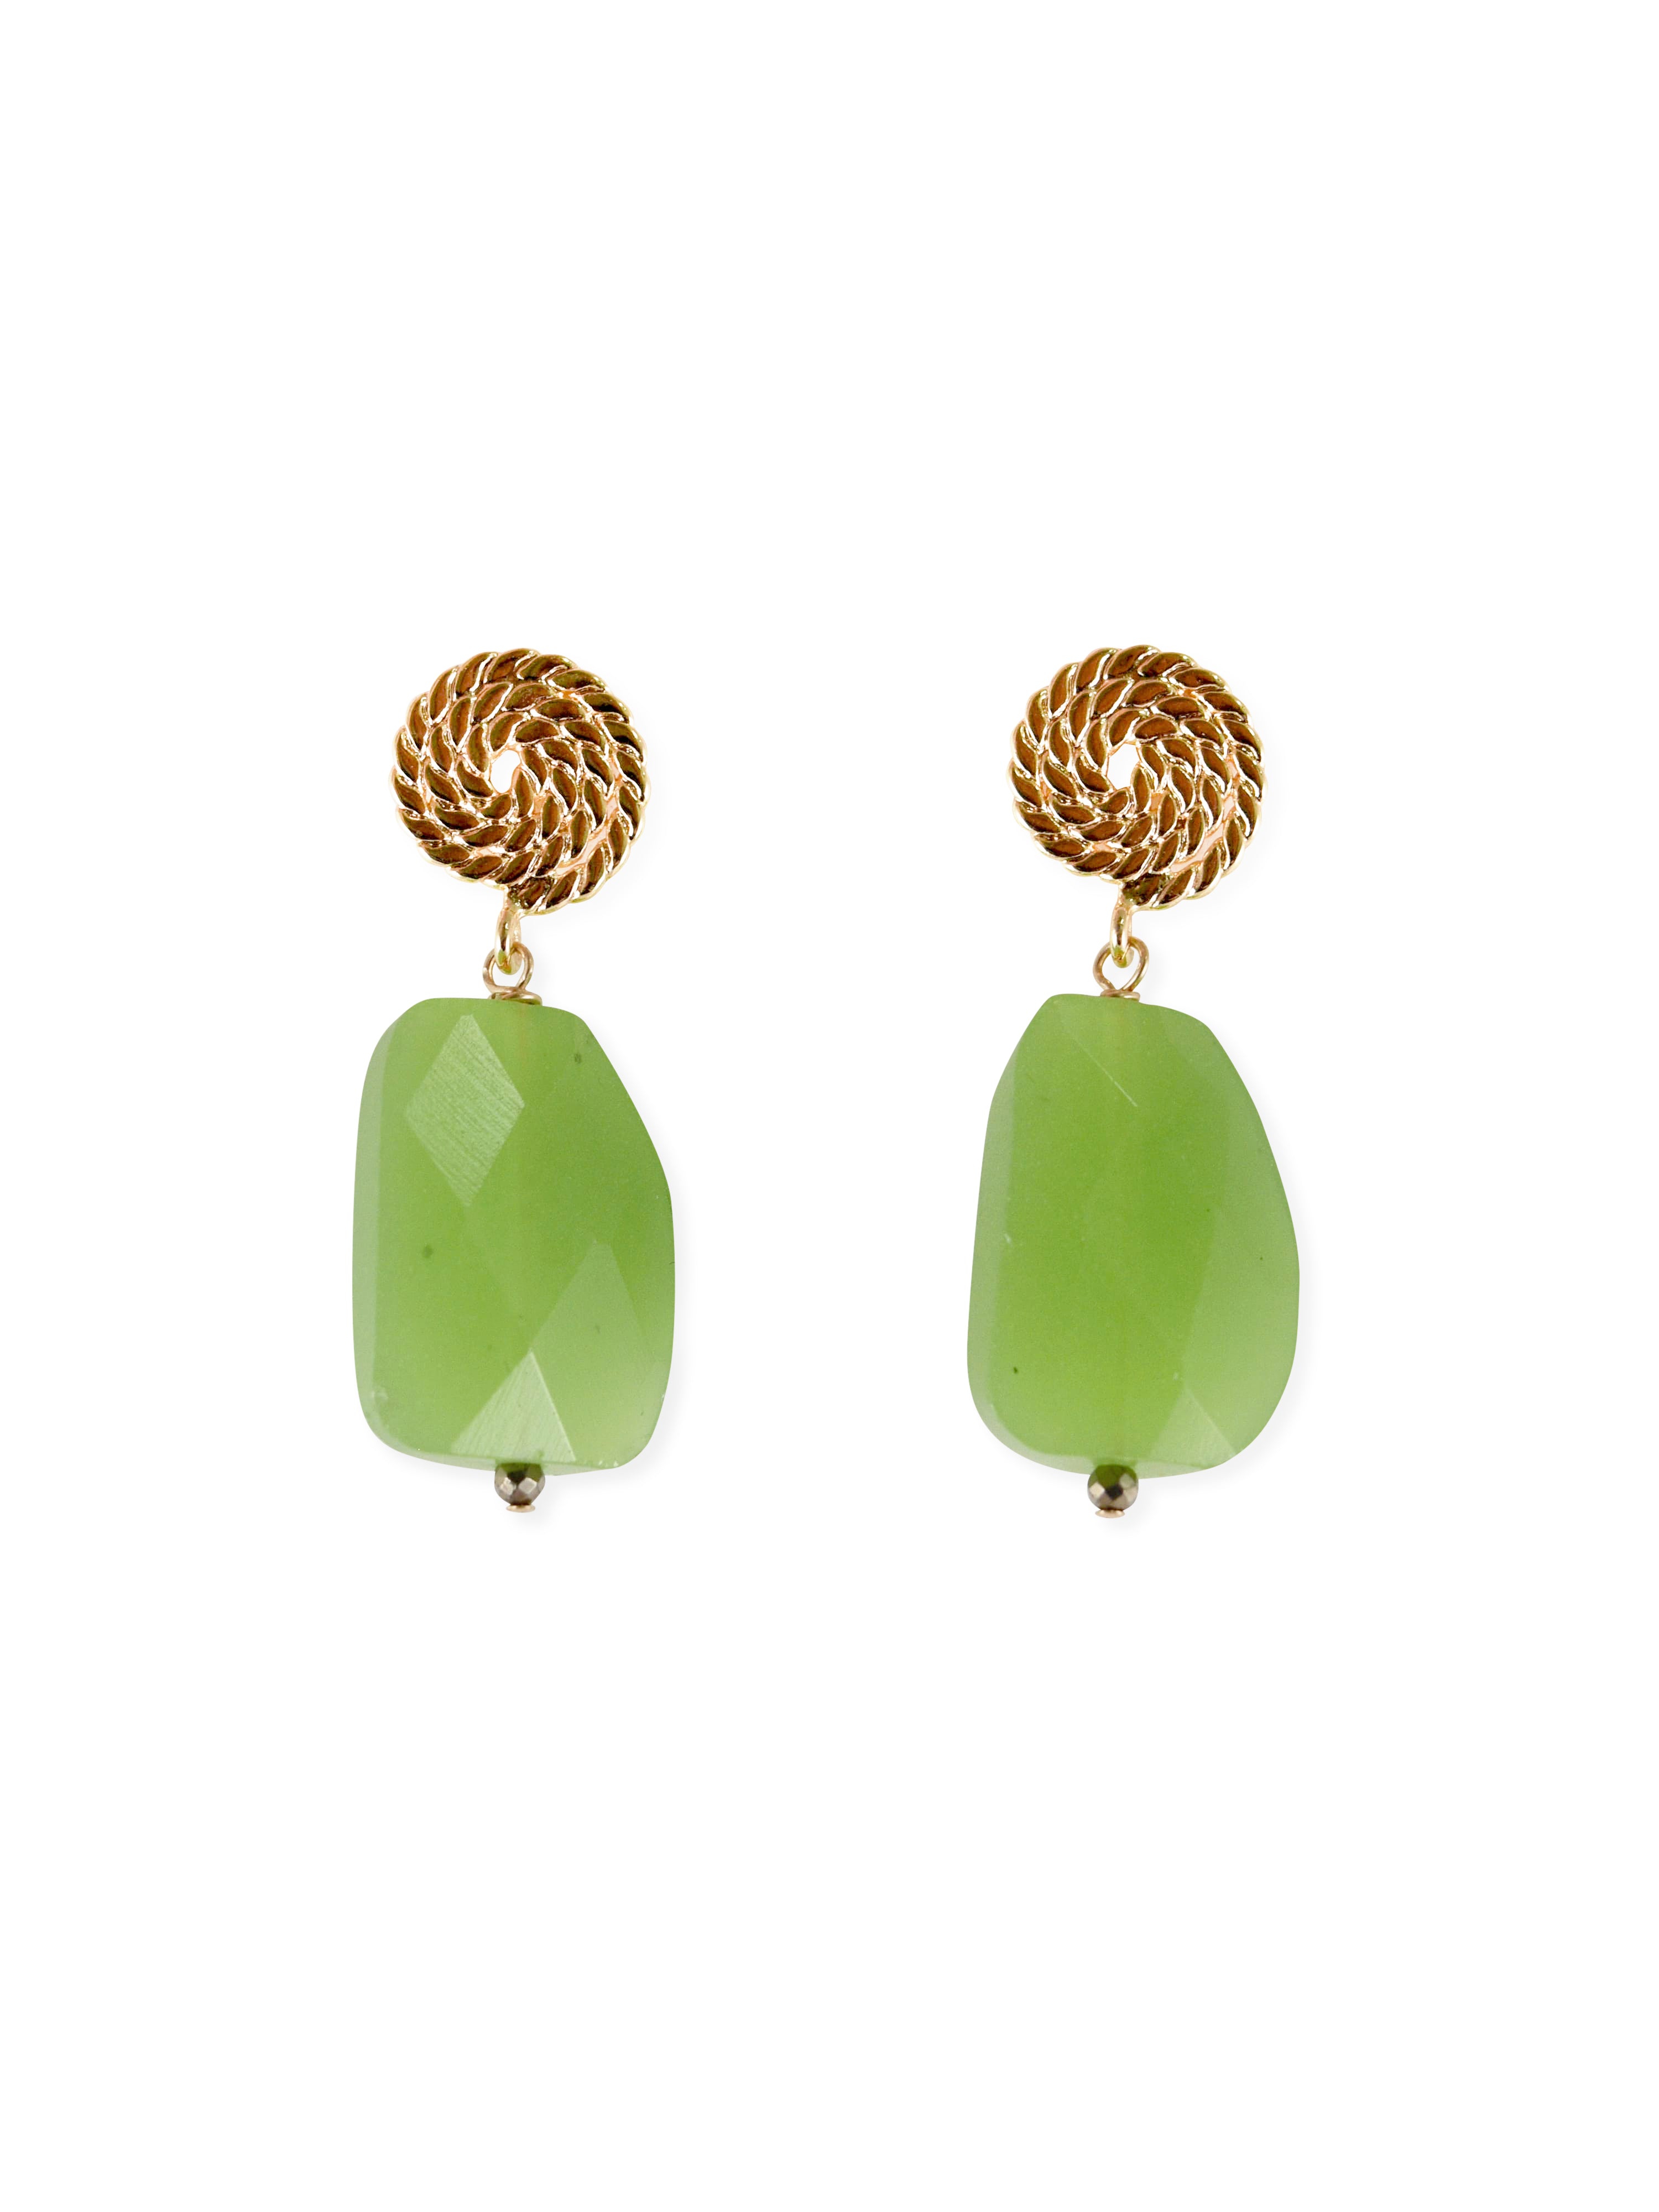 Spartina Earrings in Lime